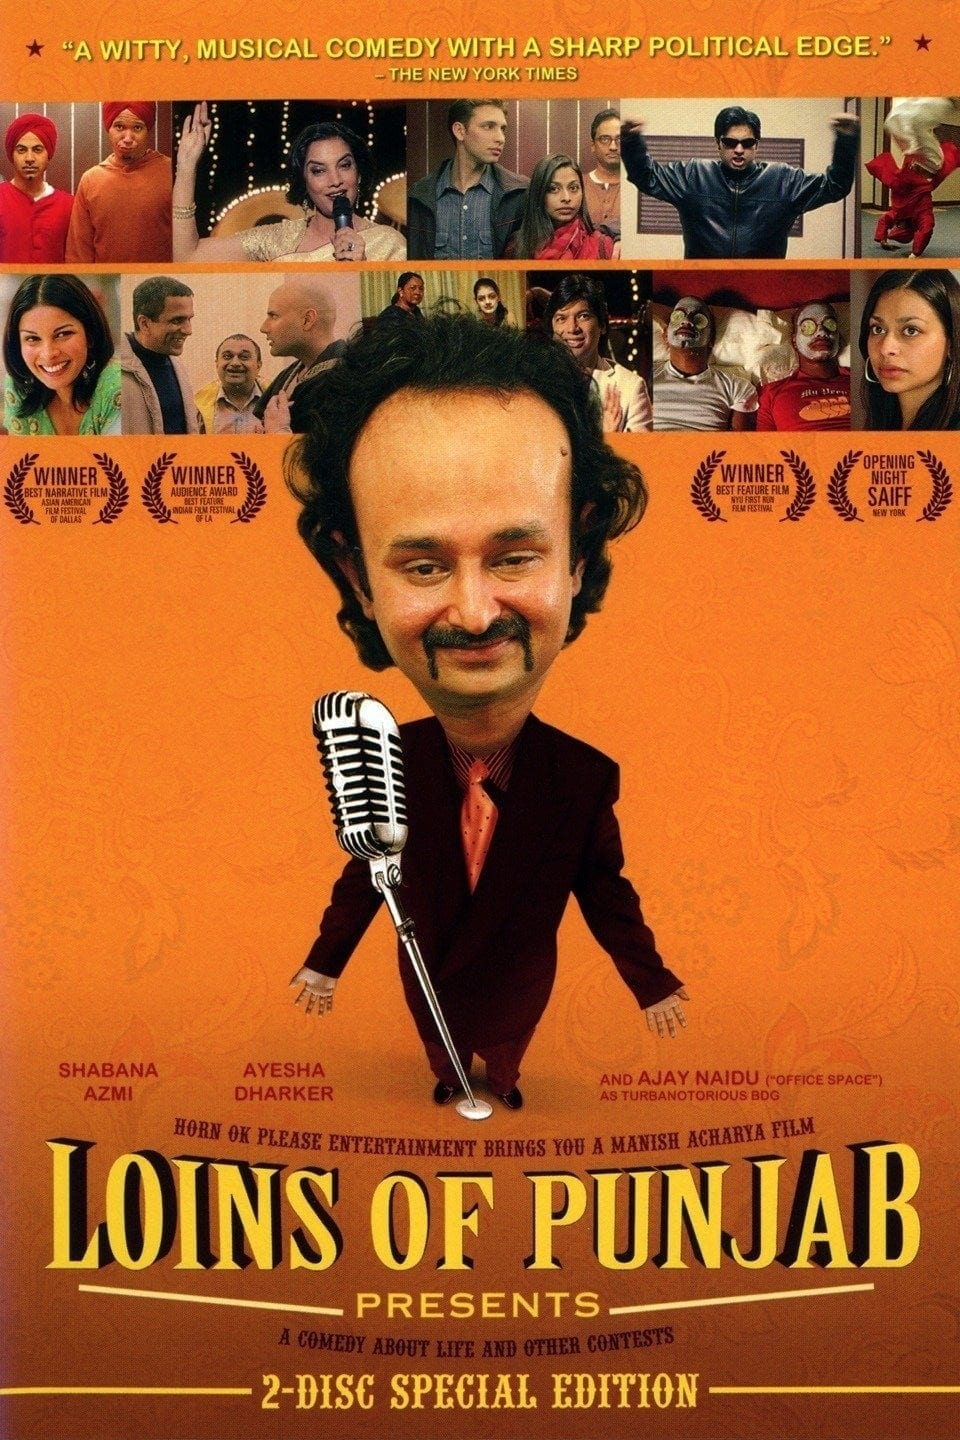 Poster for the movie "Loins of Punjab Presents"